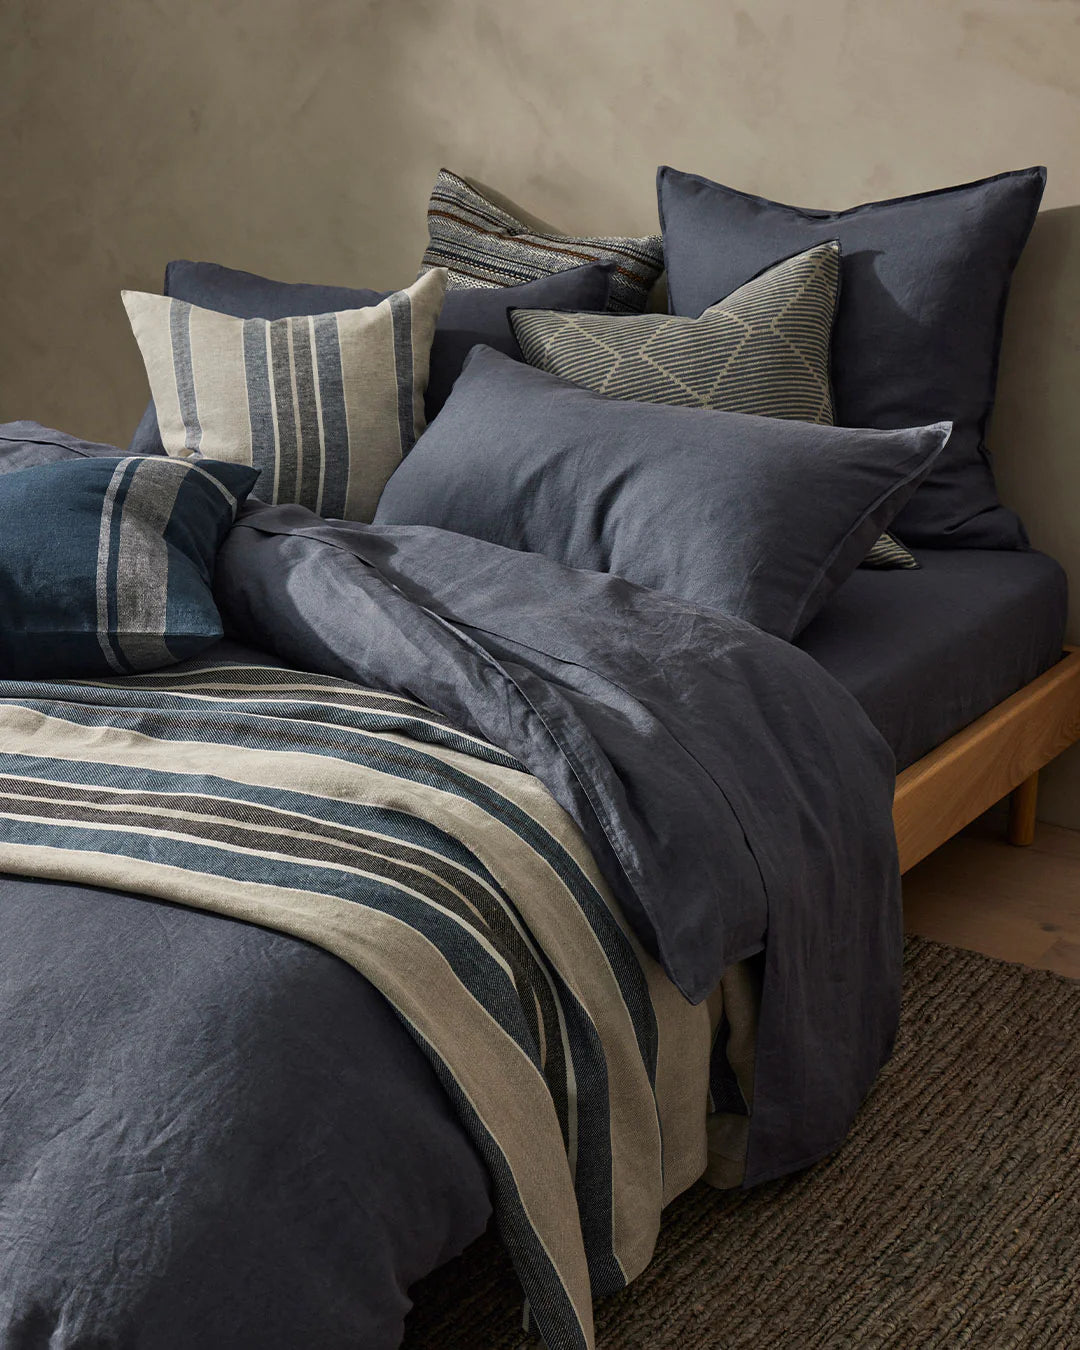 Crafted from the highest quality French Flax Linen, each product from the Ravello range is prewashed and aero finished for a unique and luxuriously soft, relaxed feel, making it a dream to rest and relax in.  The Denim colourway is a soft denim blue that will bring a sense of calm to your bedroom and sit beautifully in any cool, neutral or coastal setting.